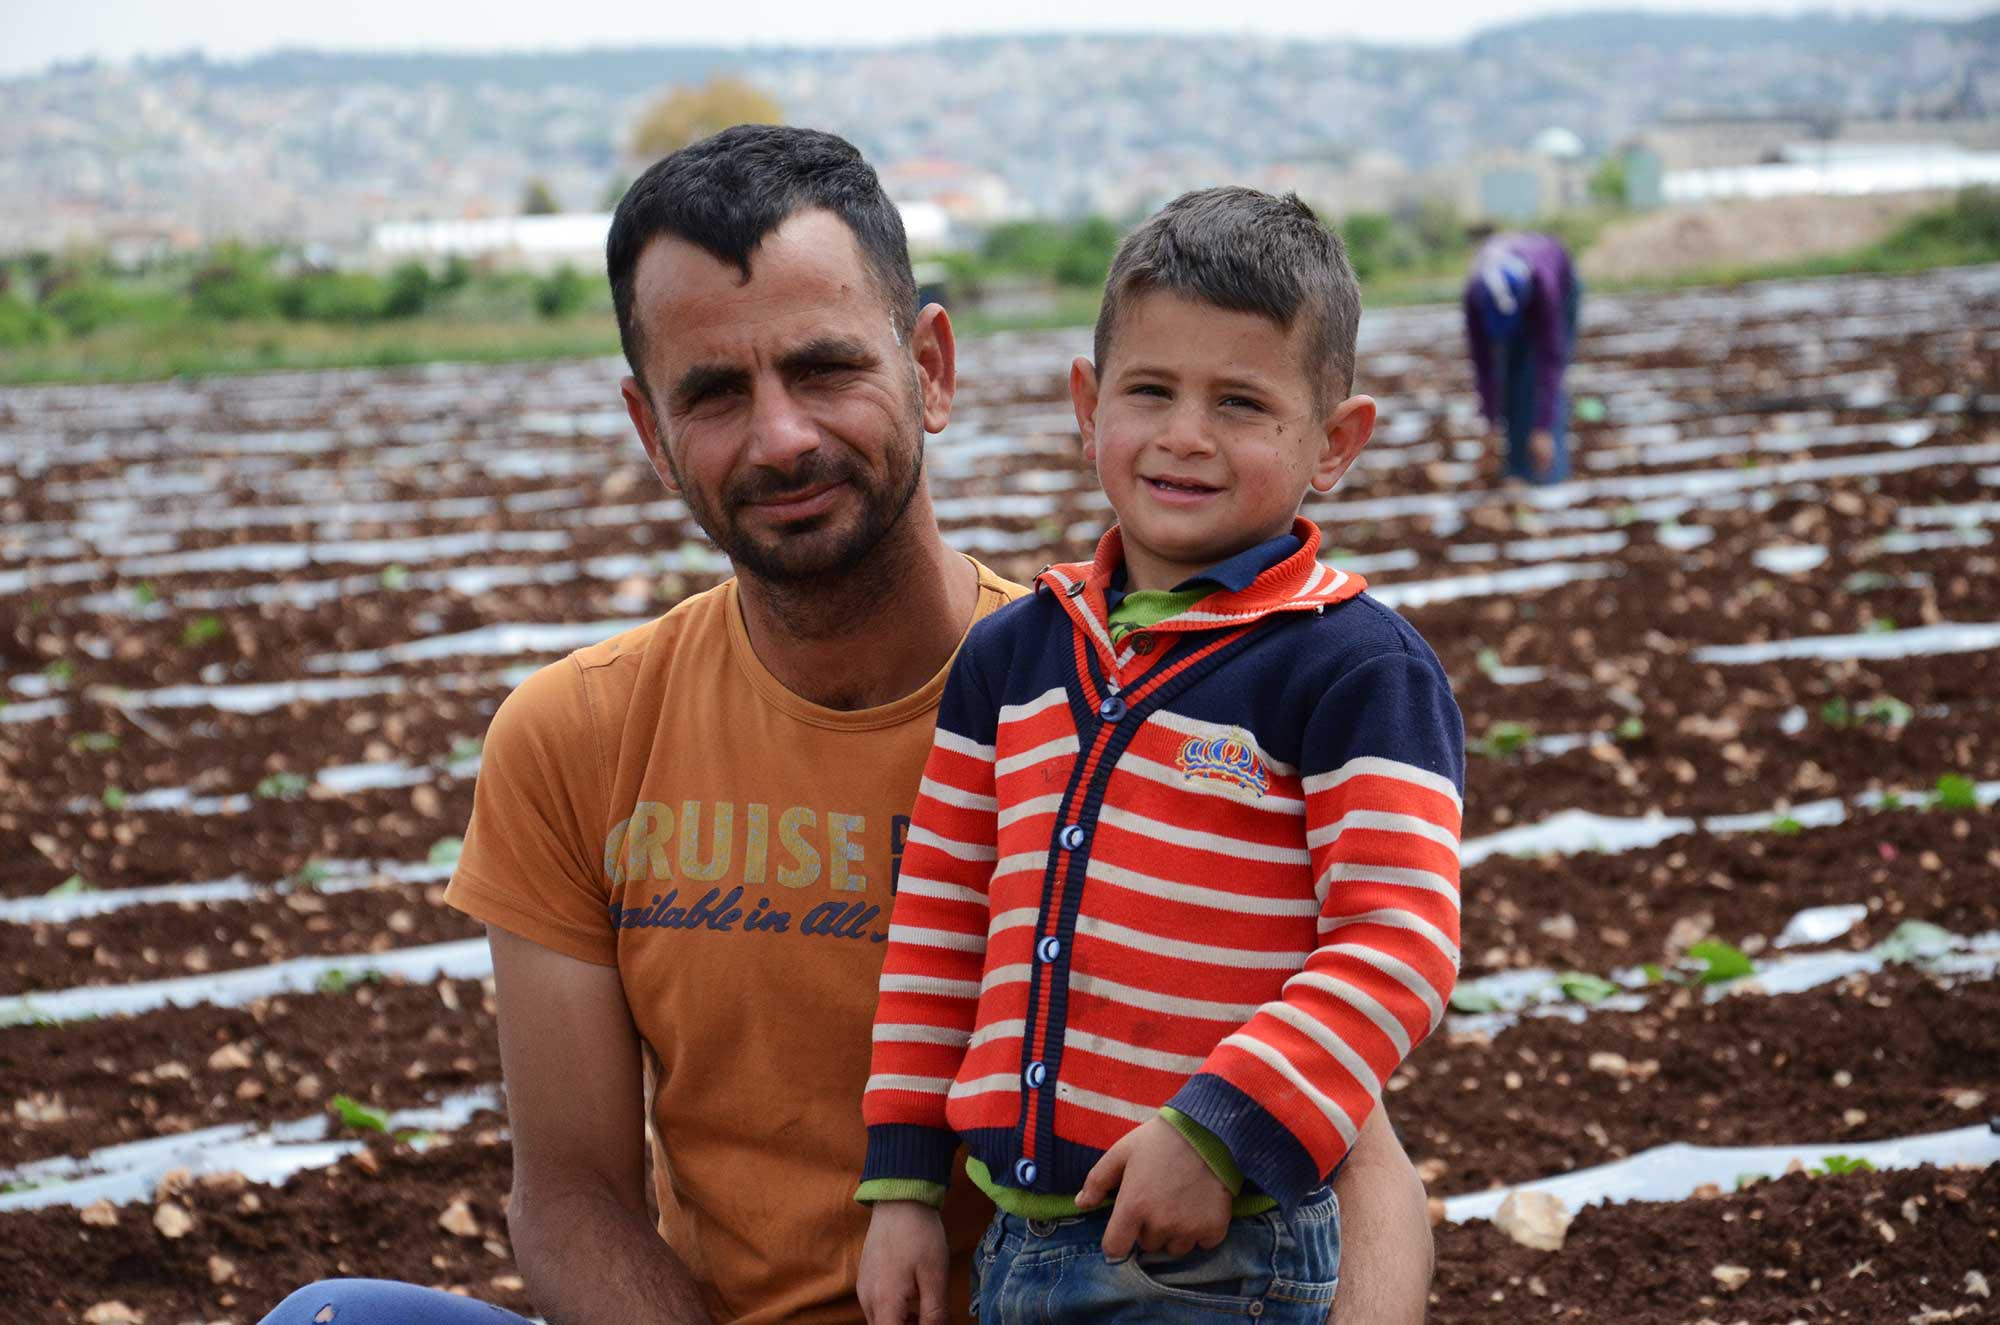 Mohammad is Imad’s worker on the farm. He’s pictured here with his son, Huthayfa.